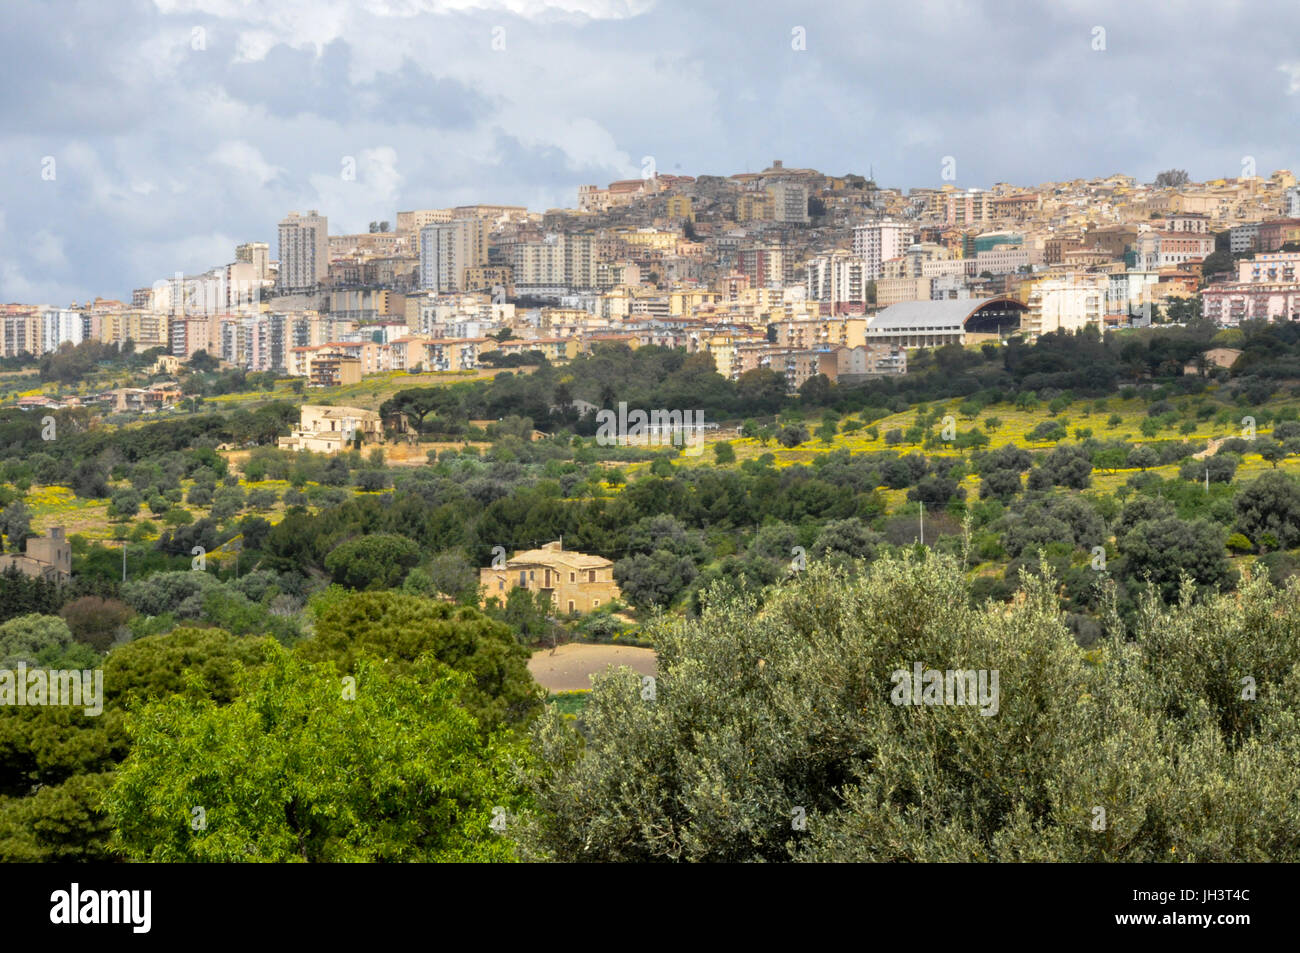 Olive groves on the outskirts of Agrigento, Sicily, Italy. Stock Photo